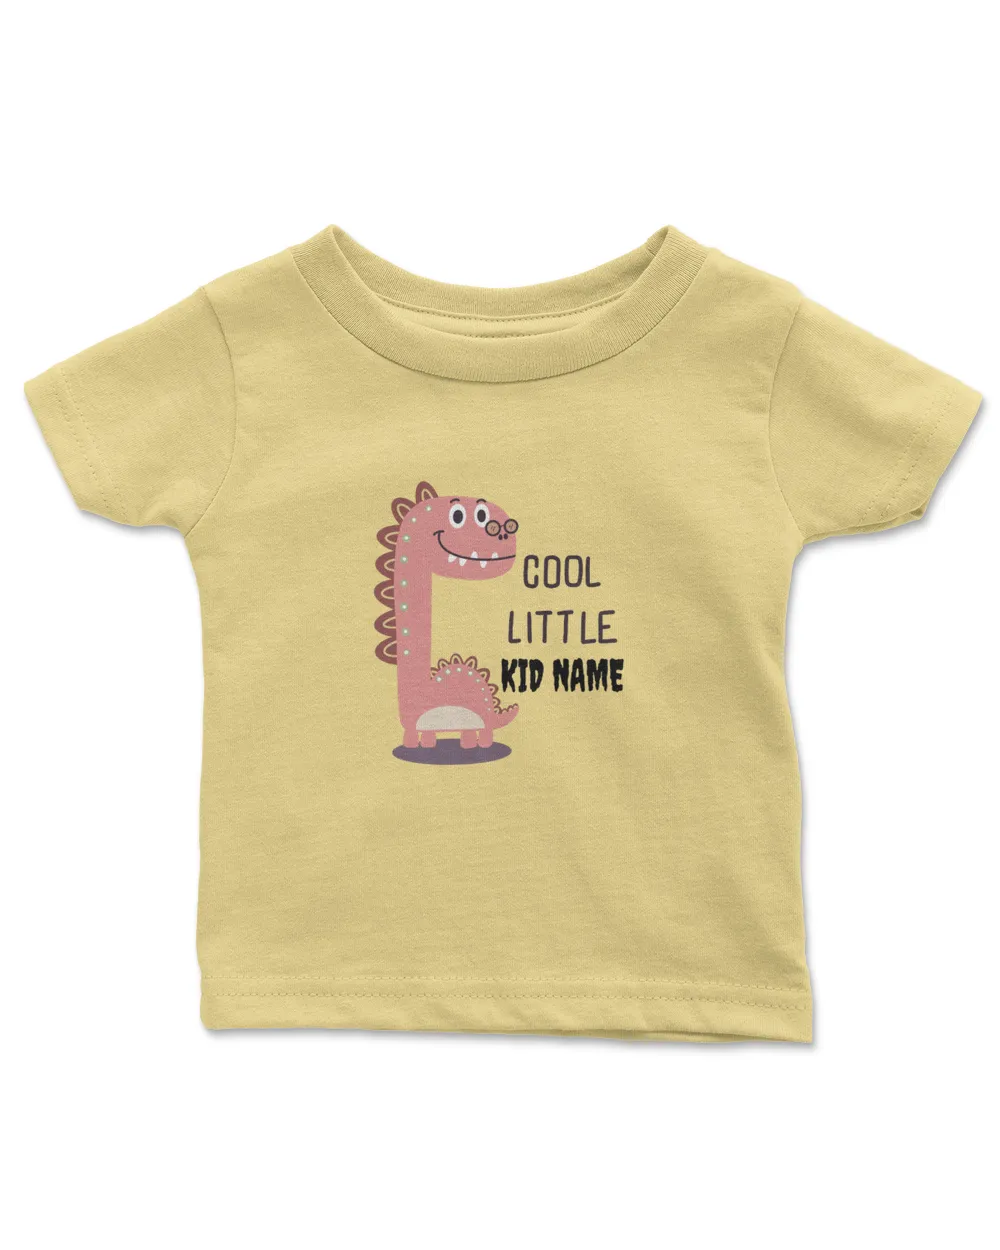 Personalized Cool little Dino for Kiddo